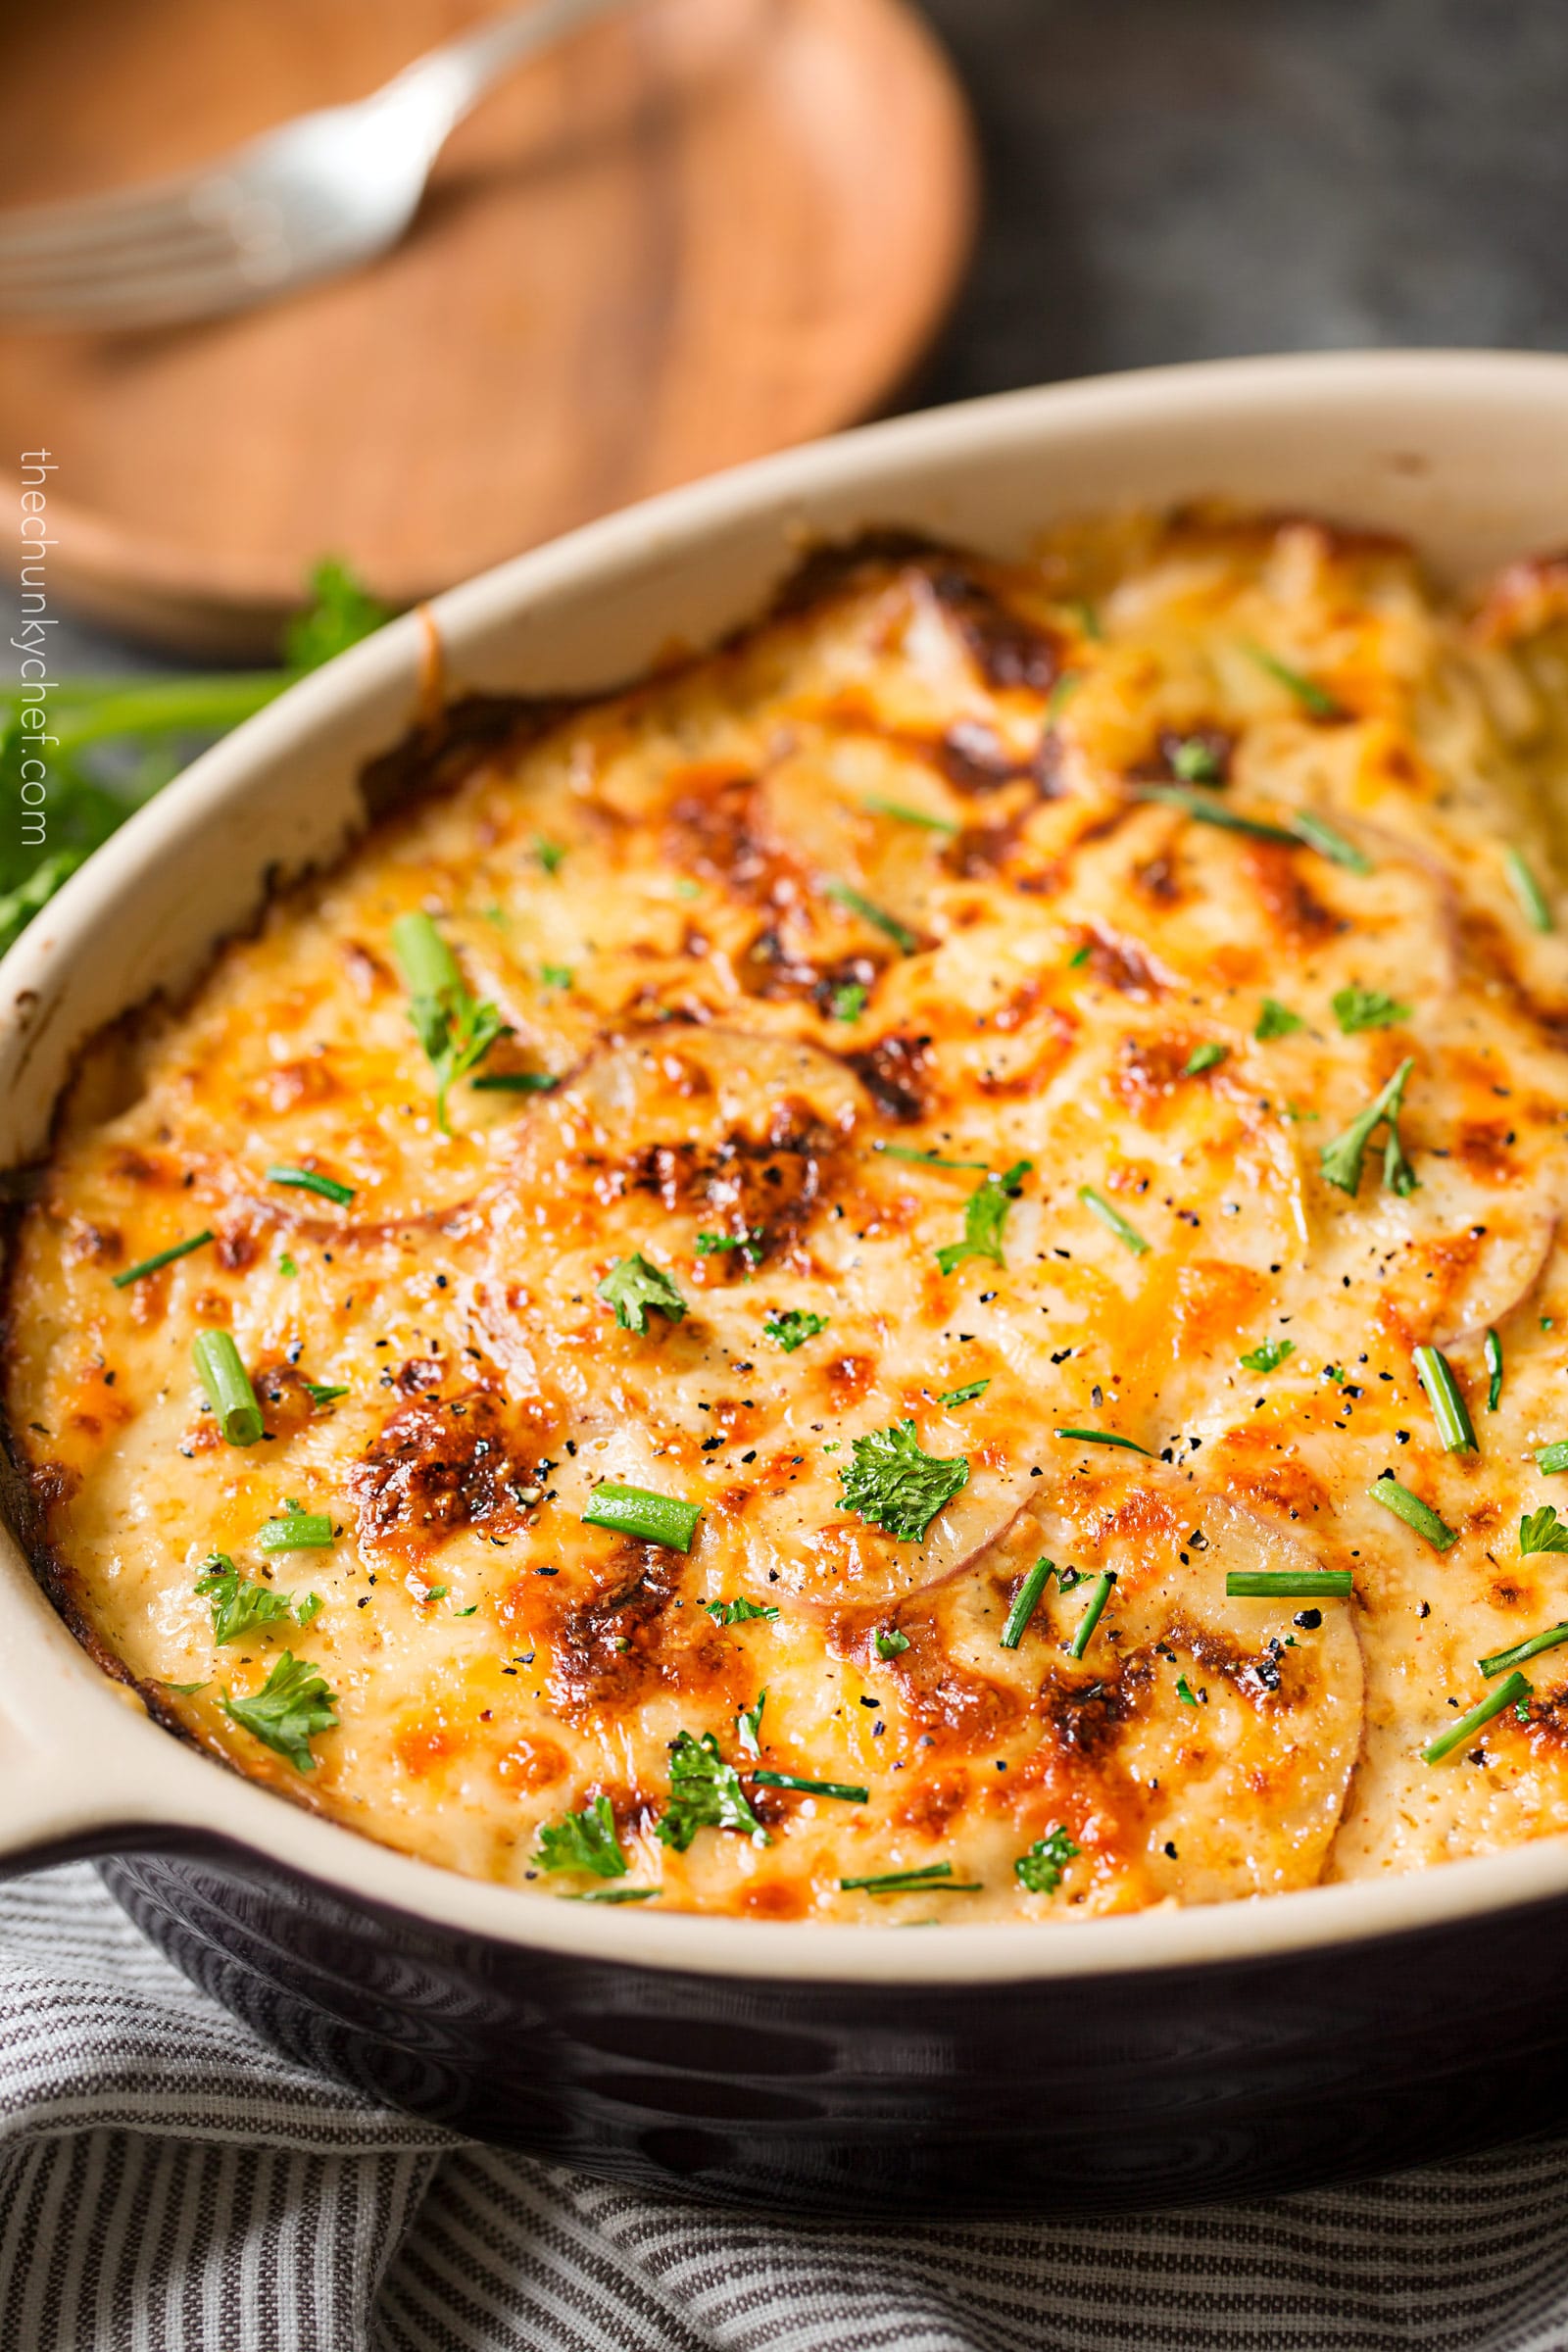 http://www.thechunkychef.com/wp-content/uploads/2017/03/Cheesy-Scalloped-Potatoes-7.jpg